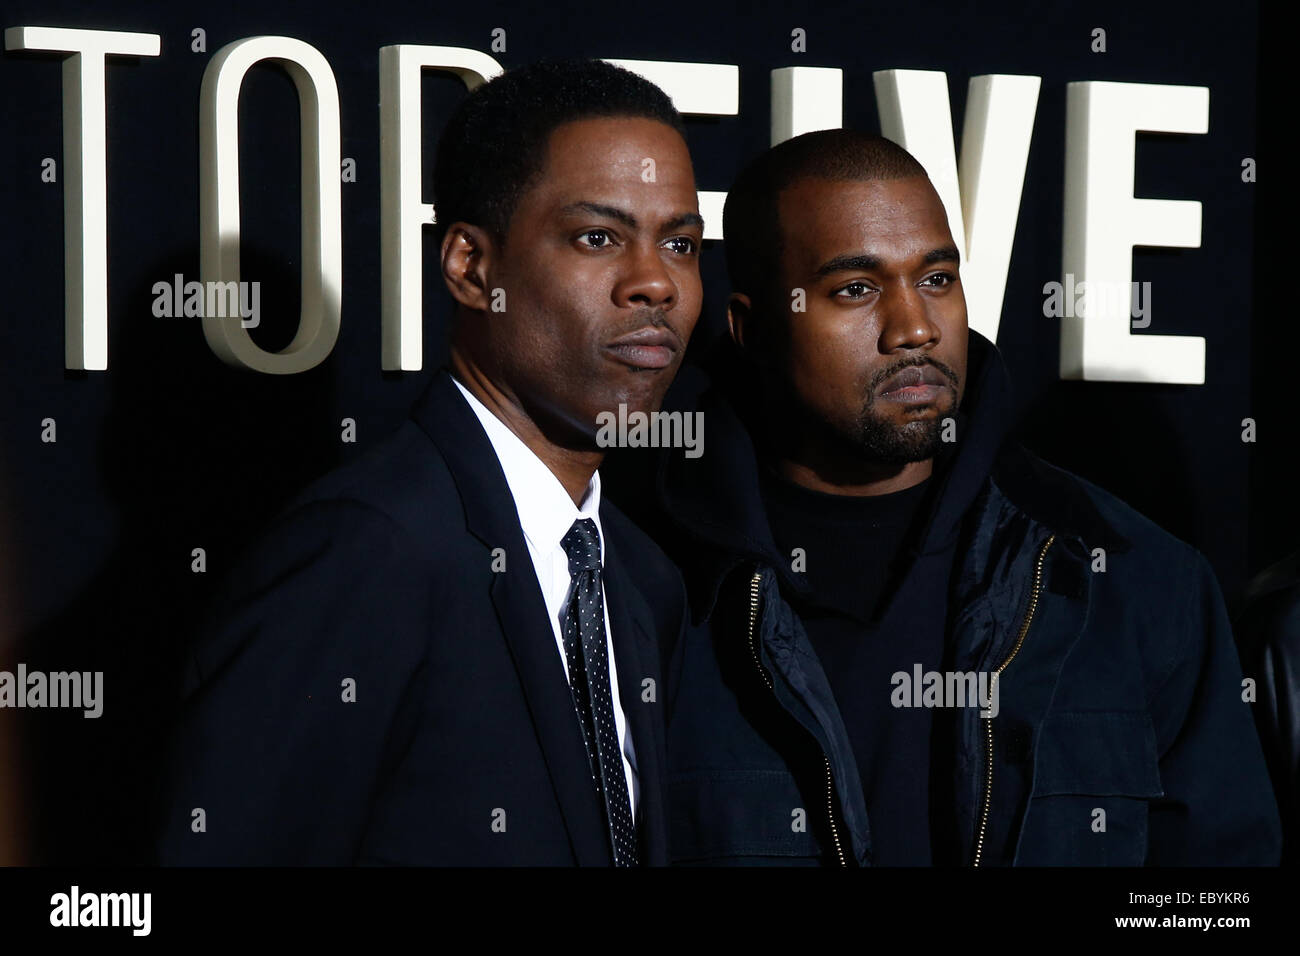 NEW YORK-DEC 3: Comedian/actor Chris Rock and rapper Kanye West attend the 'Top Five' premiere at the Ziegfeld Theatre on December 3, 2014 in New York City.© Debby Wong/Alamy Live News Stock Photo